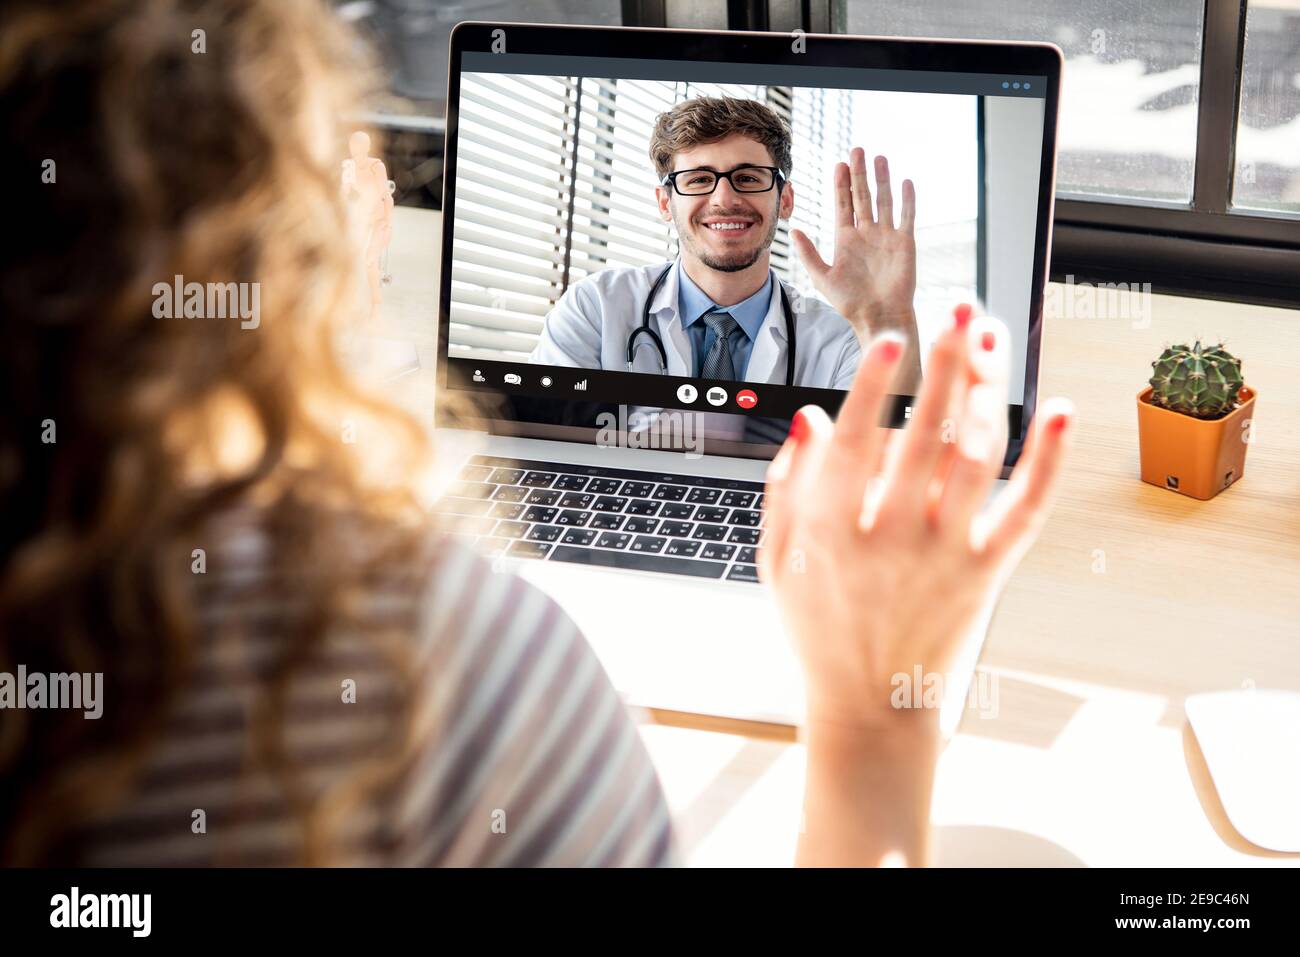 Female patient meeting with doctor via video call on laptop computer at home, medical online service concepts Stock Photo